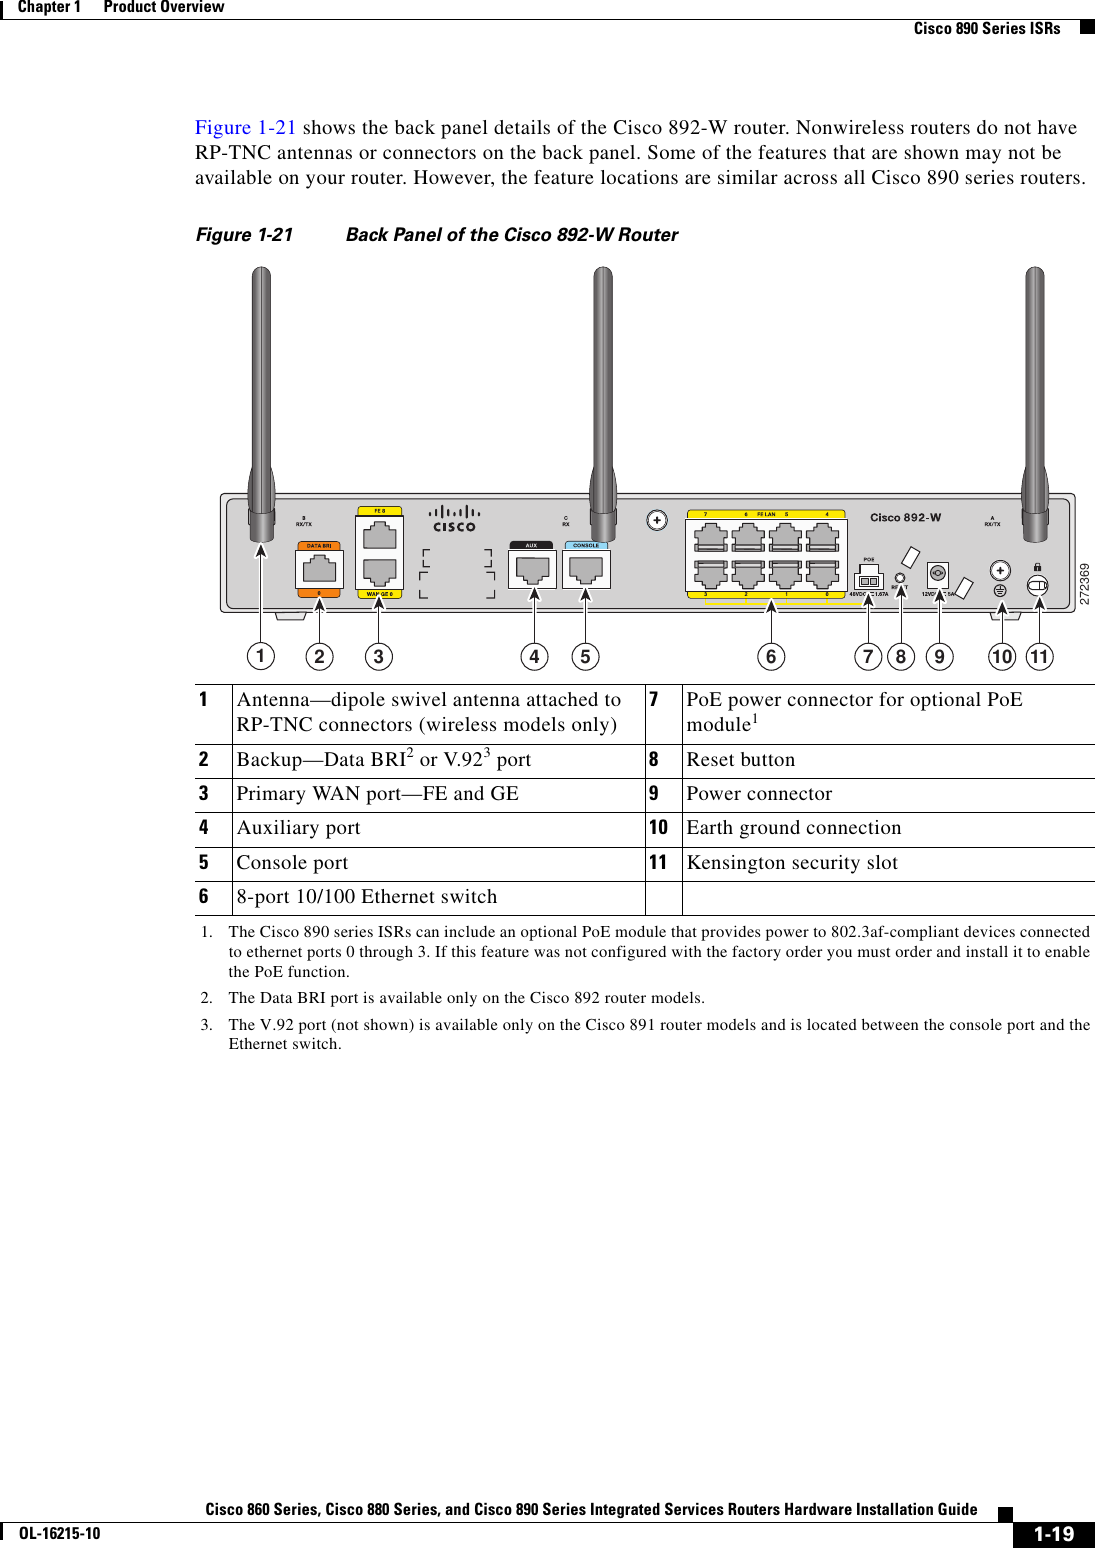  1-19Cisco 860 Series, Cisco 880 Series, and Cisco 890 Series Integrated Services Routers Hardware Installation GuideOL-16215-10Chapter 1      Product Overview  Cisco 890 Series ISRsFigure 1-21 shows the back panel details of the Cisco 892-W router. Nonwireless routers do not have RP-TNC antennas or connectors on the back panel. Some of the features that are shown may not be available on your router. However, the feature locations are similar across all Cisco 890 series routers.Figure 1-21 Back Panel of the Cisco 892-W Router1Antenna—dipole swivel antenna attached to RP-TNC connectors (wireless models only)7PoE power connector for optional PoE module11. The Cisco 890 series ISRs can include an optional PoE module that provides power to 802.3af-compliant devices connected to ethernet ports 0 through 3. If this feature was not configured with the factory order you must order and install it to enable the PoE function.2Backup—Data BRI2 or V.923 port2. The Data BRI port is available only on the Cisco 892 router models.3. The V.92 port (not shown) is available only on the Cisco 891 router models and is located between the console port and the Ethernet switch.8Reset button3Primary WAN port—FE and GE 9Power connector4Auxiliary port 10 Earth ground connection5Console port  11 Kensington security slot68-port 10/100 Ethernet switch27236914 5 6 8 9 10 1172 3